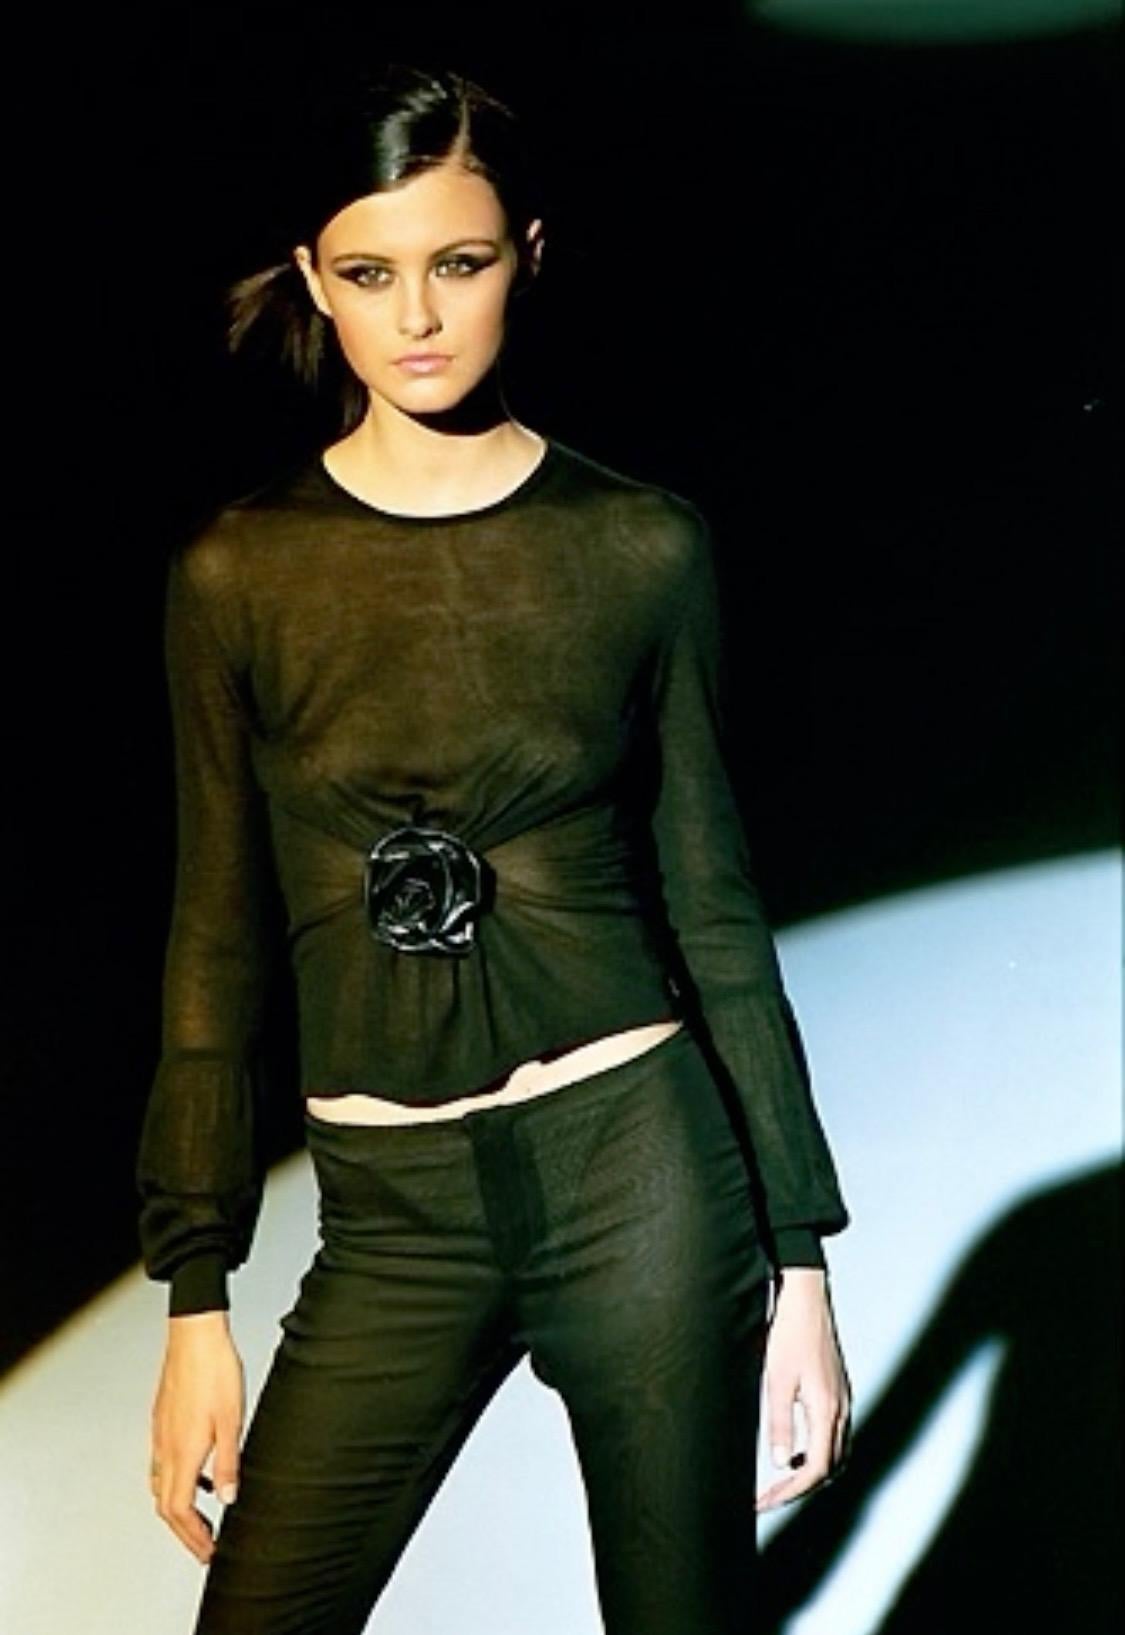 Presenting a beautiful semi-sheer Gucci blouse with a leather flower applique, designed by Tom Ford. From the Fall/Winter 1999 collection, this top debuted on the season's runway and was also used in the season's ad campaign photographed by Steven